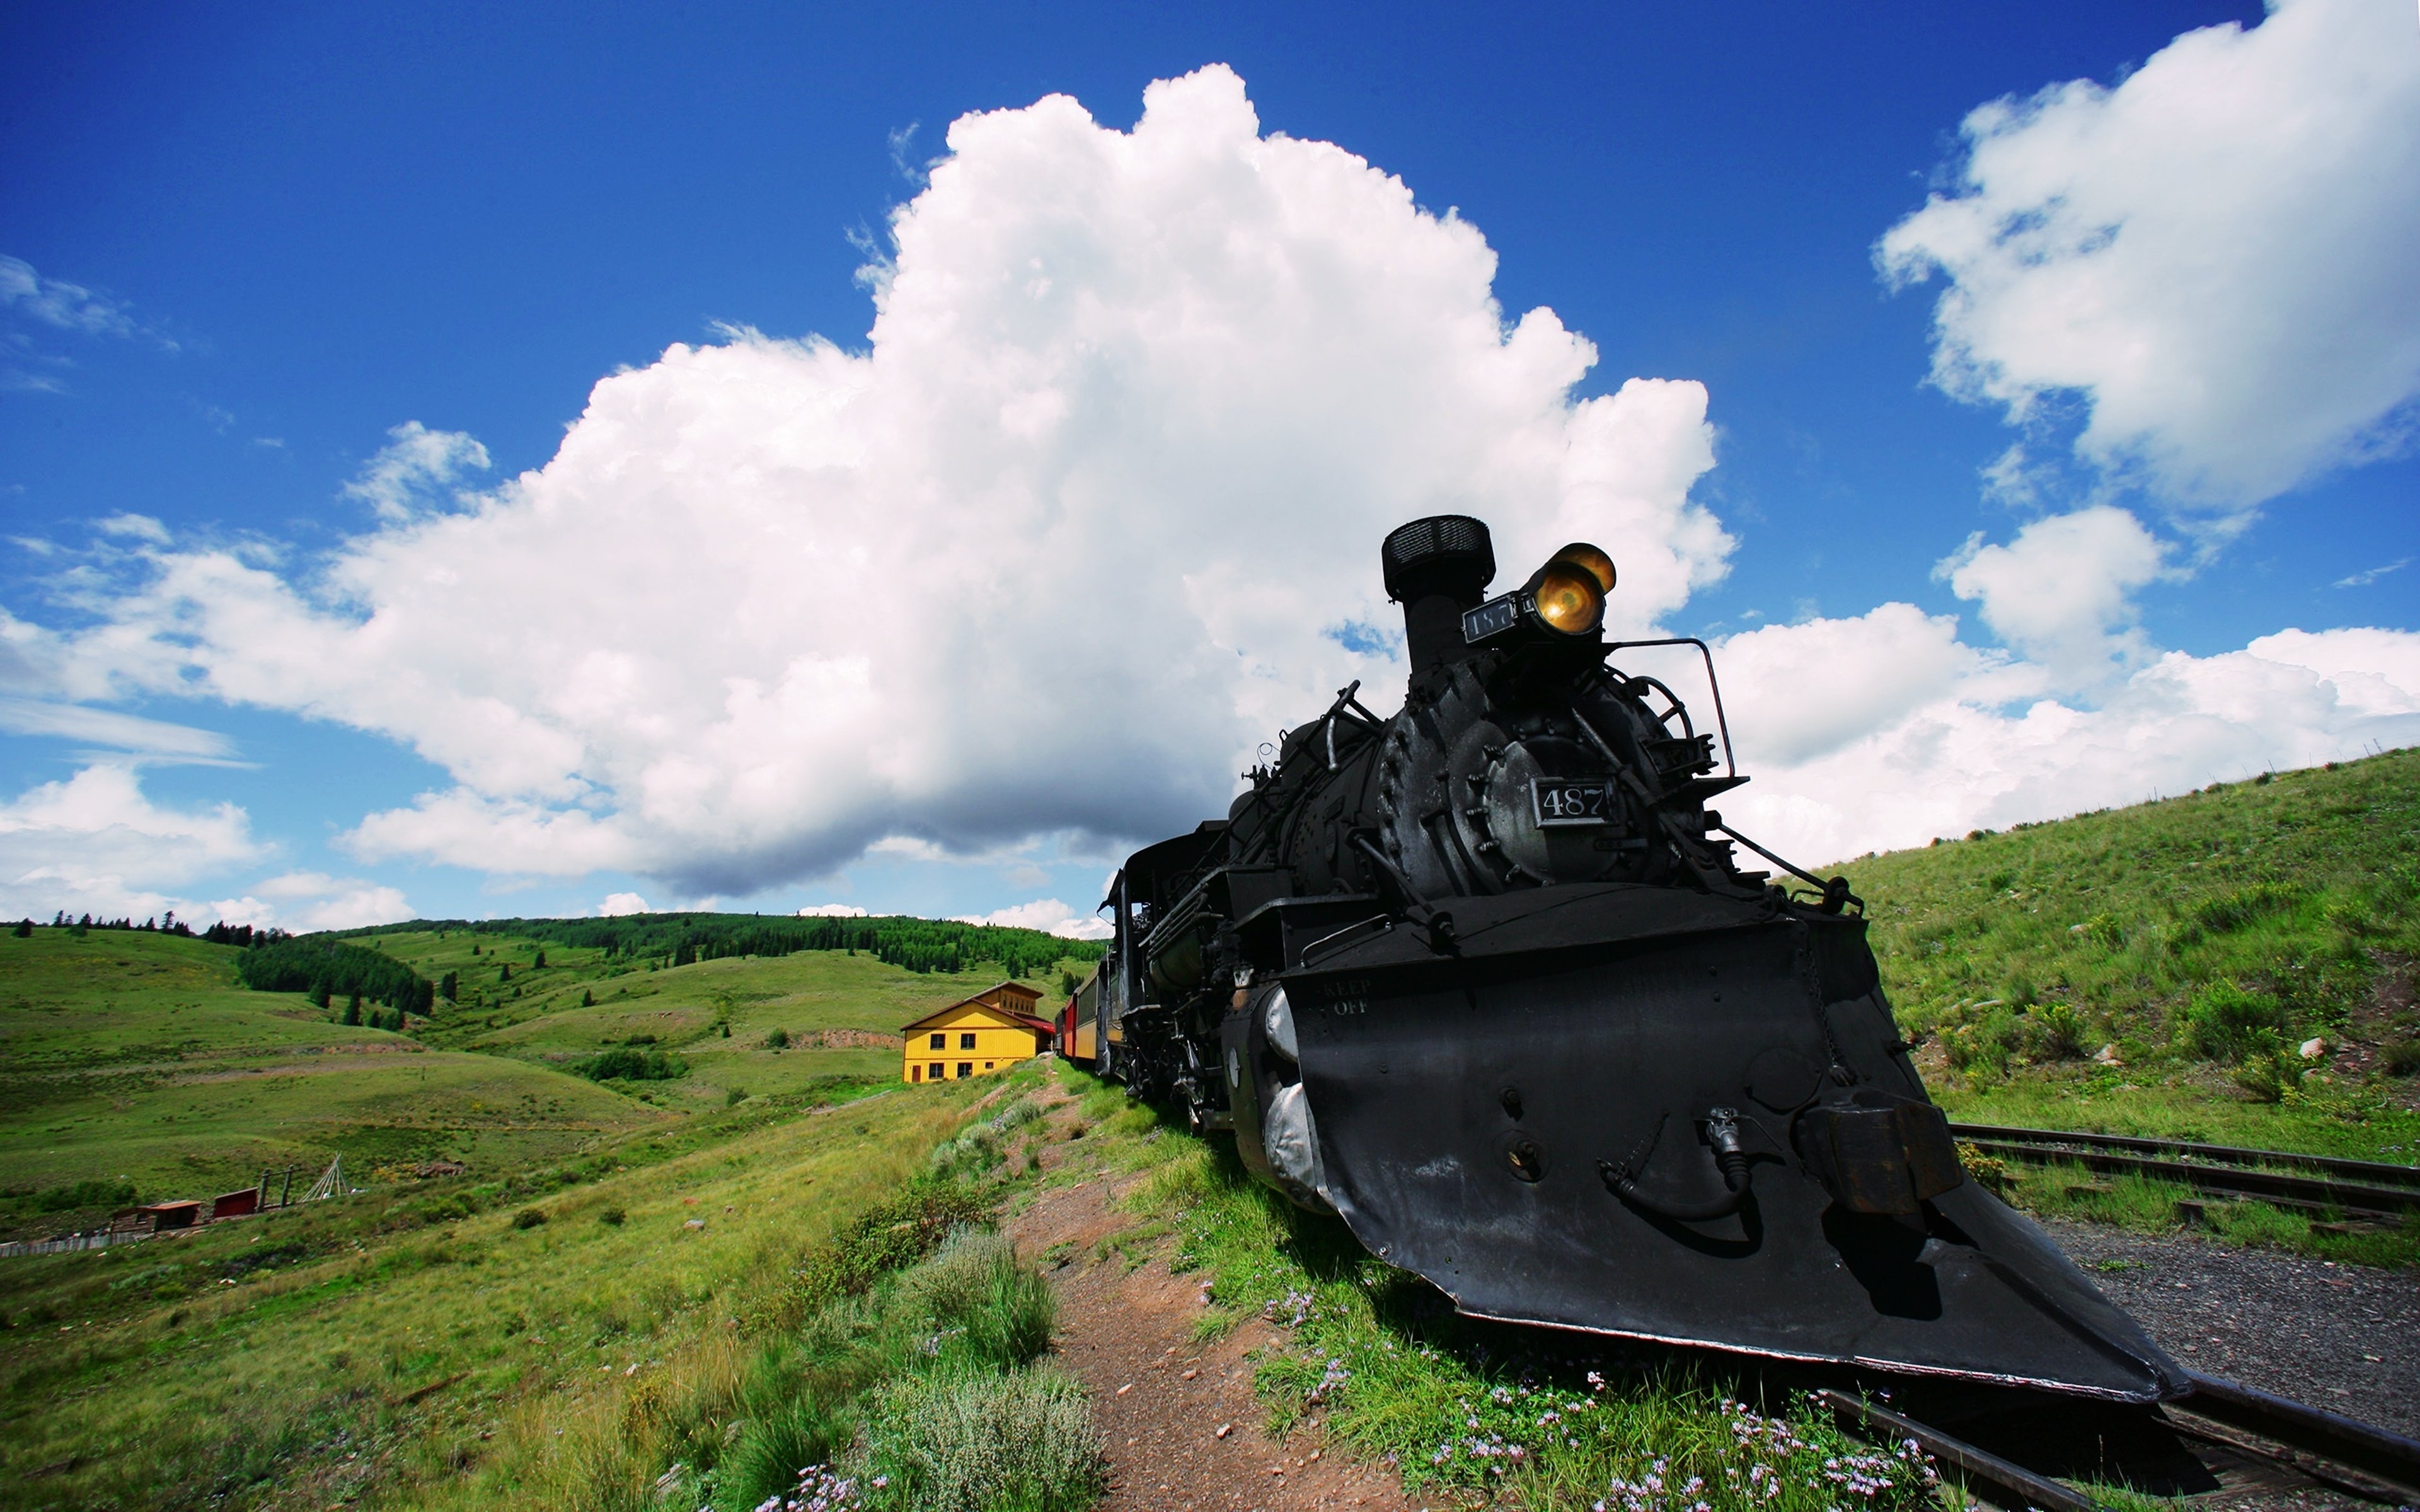 clouds, Landscapes, Old, Railroad, Sky, Sunny, Trains, Hills, Grass, Sunny, Motors, Speed, Green, Countryside, House Wallpaper